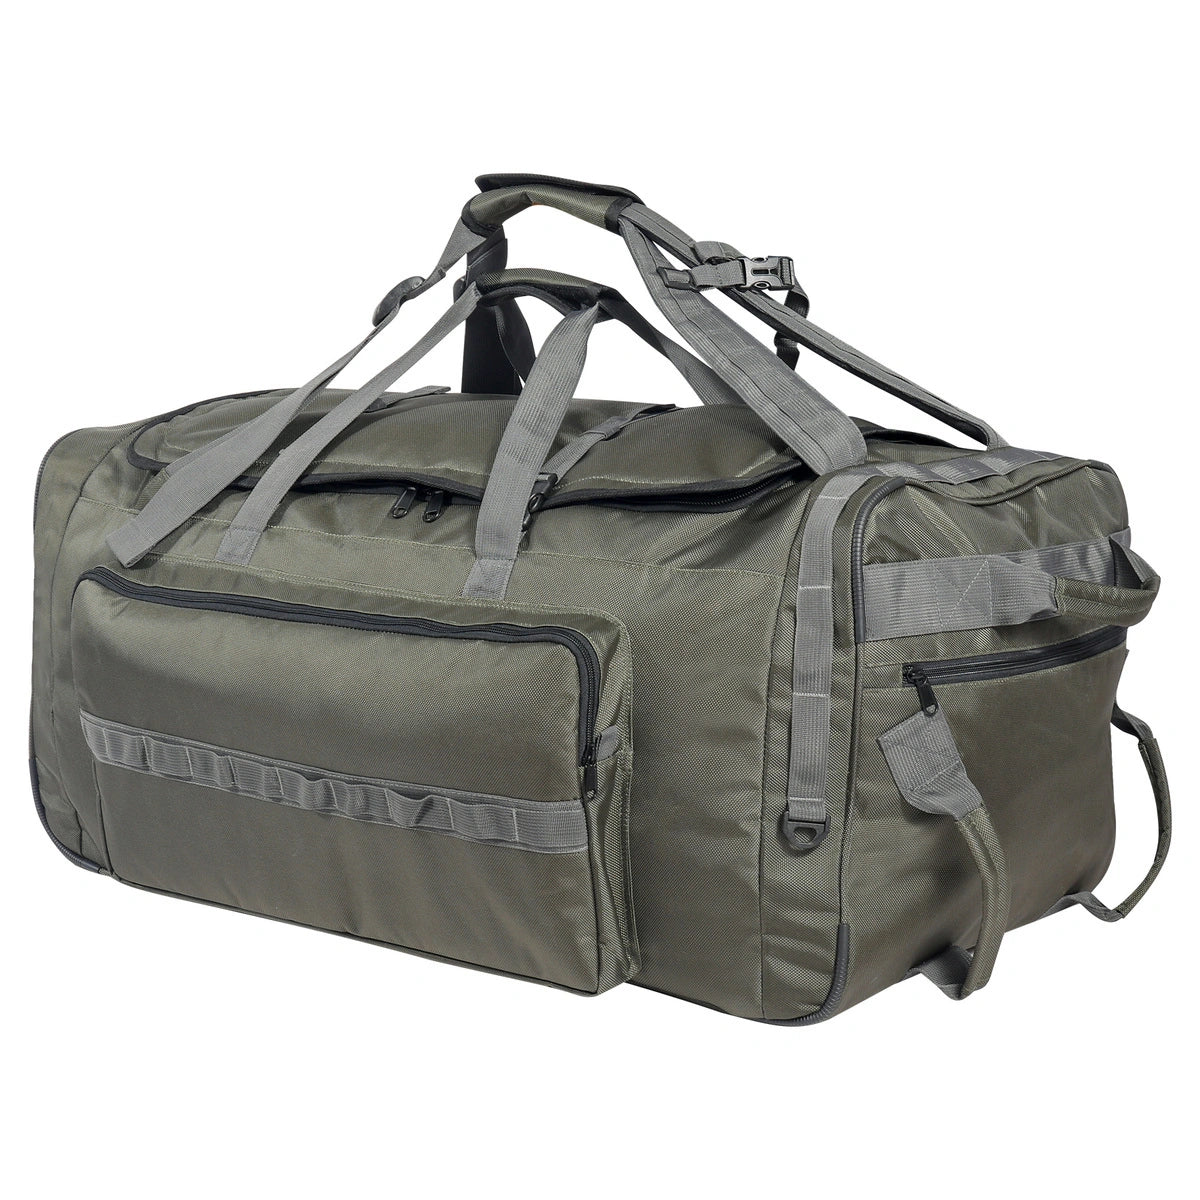 140L Tactical Duffle Bag with Wheels and Backpack Straps